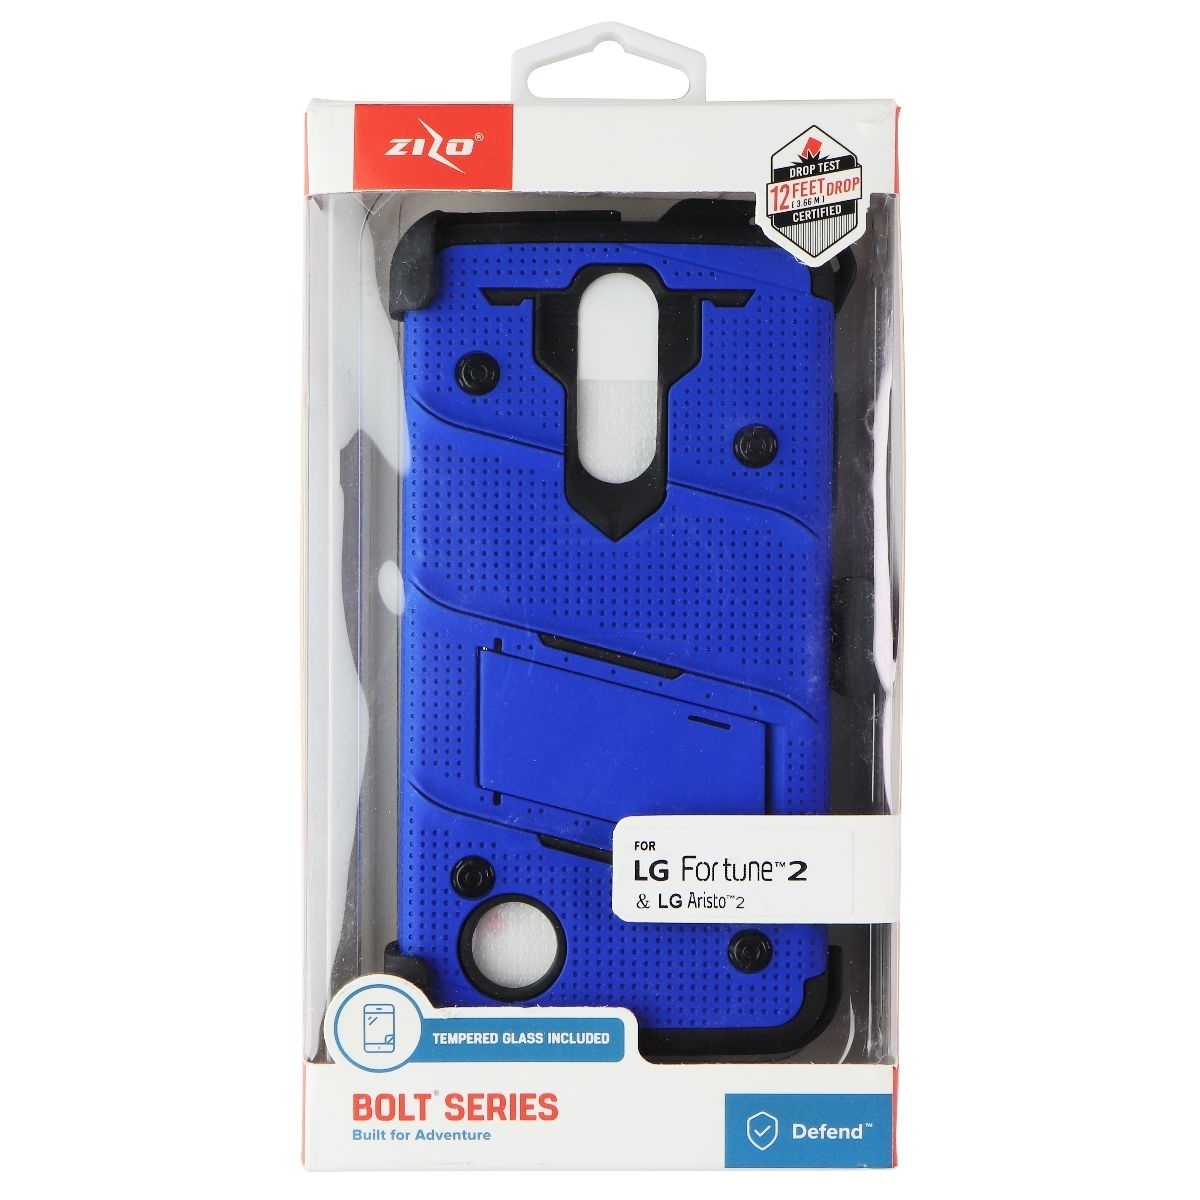 Zizo Bolt Series Case And Holster For LG Fortune 2 / Aristo 2 - Blue (Refurbished)